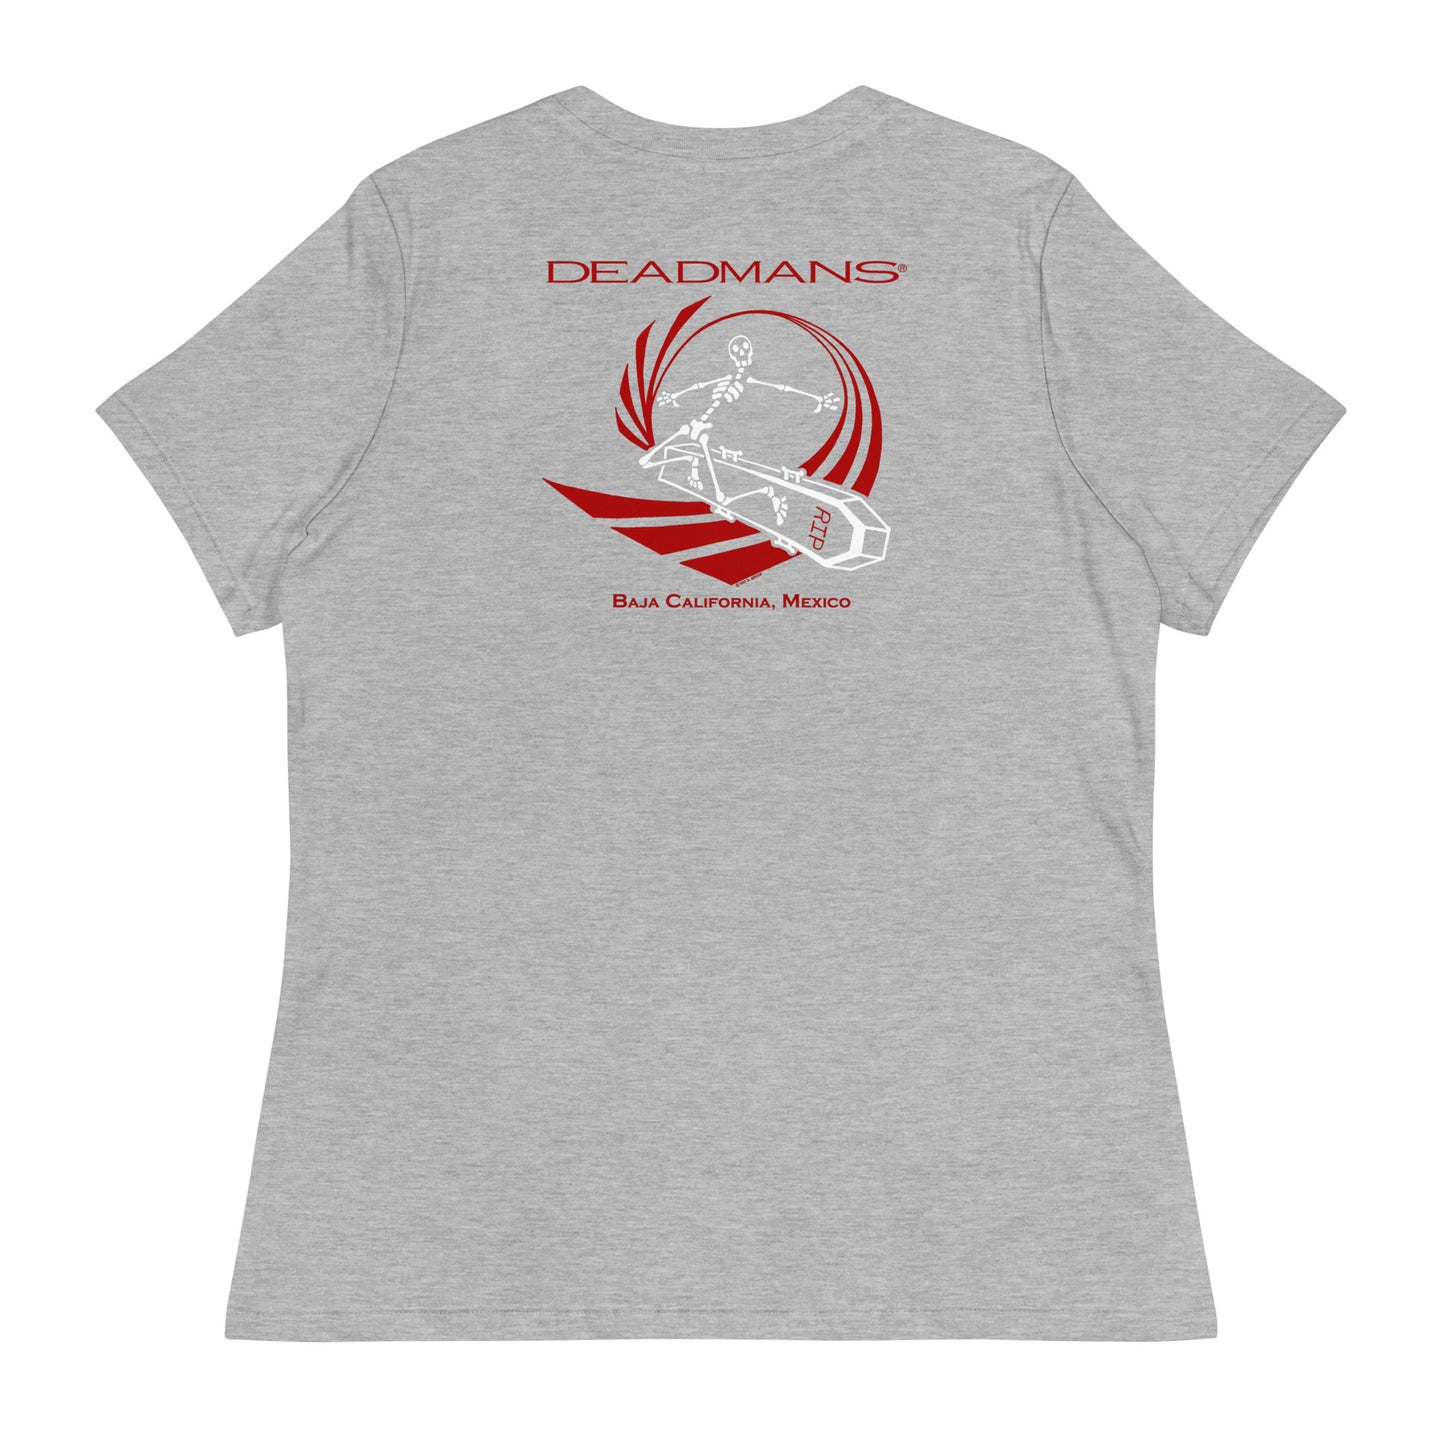 Women's Relaxed T-Shirt - Tubed on Coffin